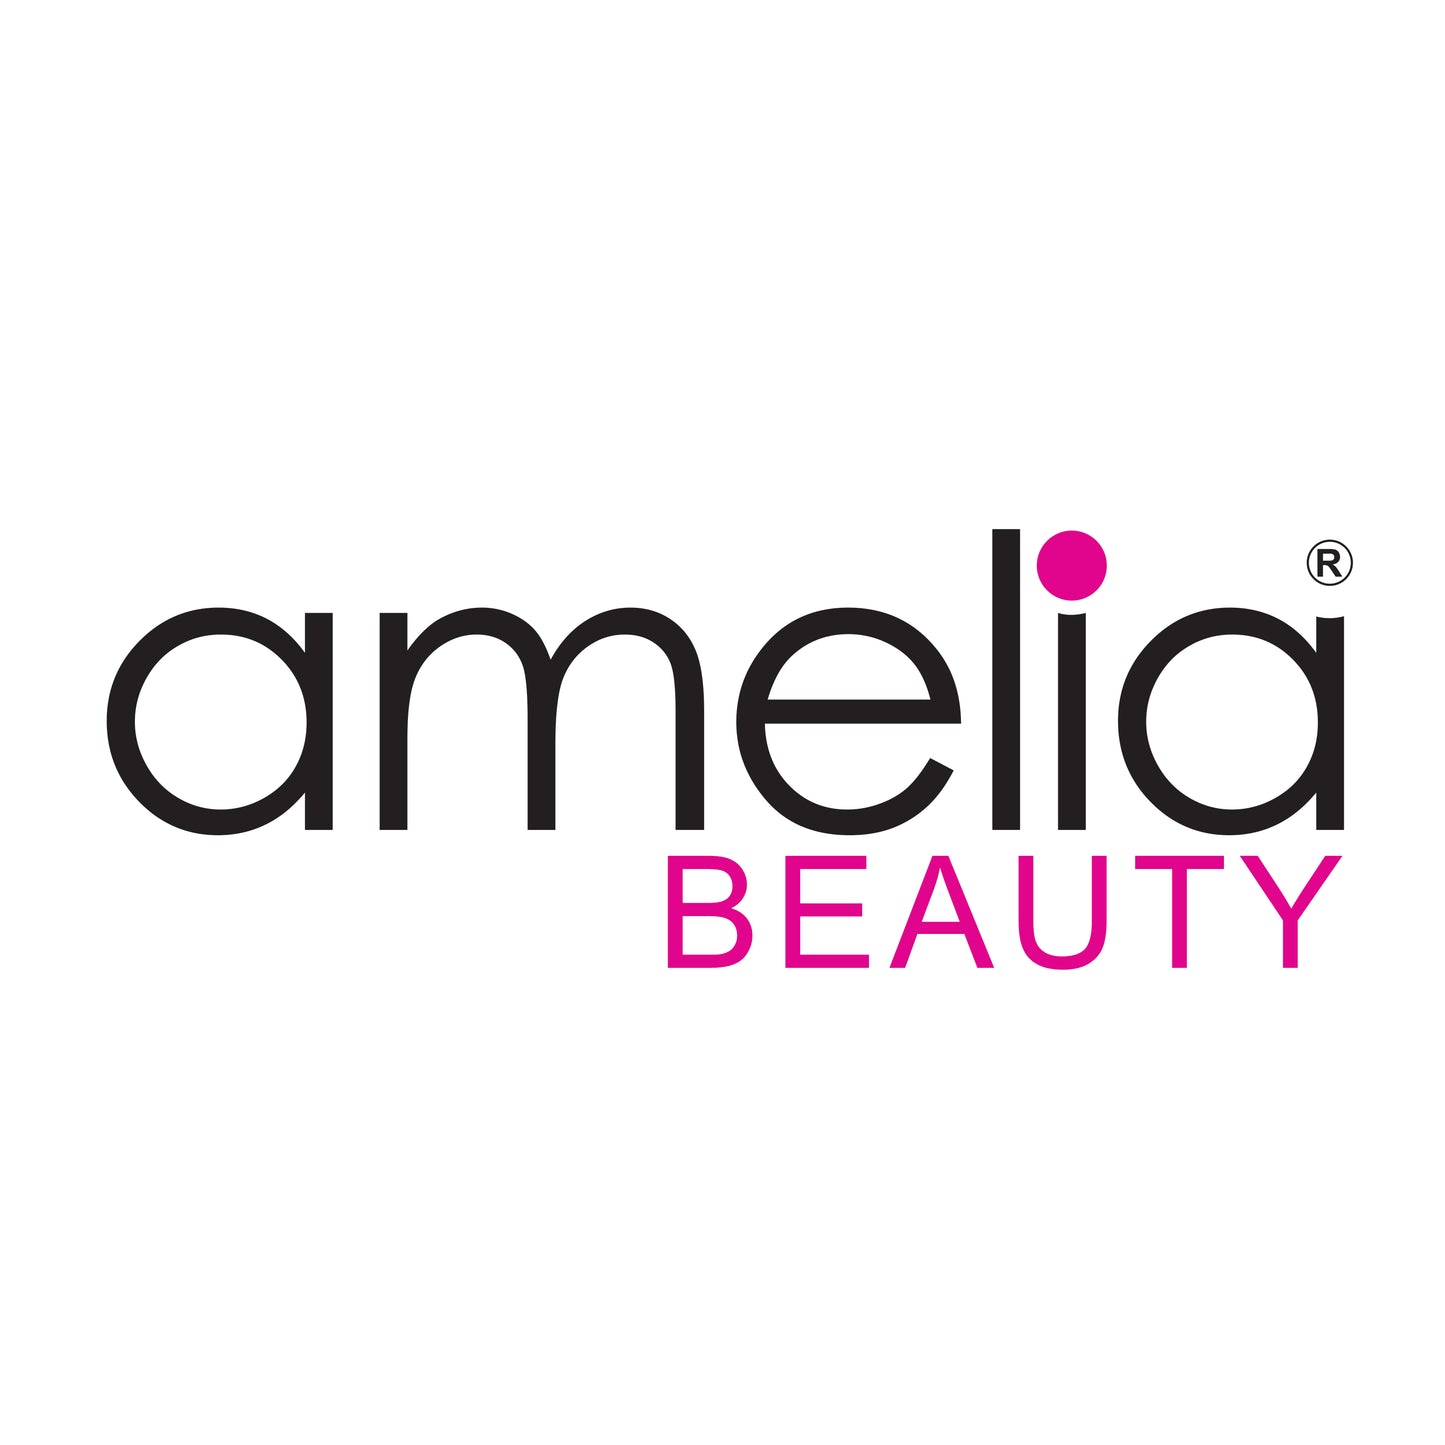 Amelia Beauty Products 8 Small Elastic Hair Coils, 1.5in Diameter Thick Spiral Hair Ties, Gentle on Hair, Strong Hold and Minimizes Dents and Creases, Black